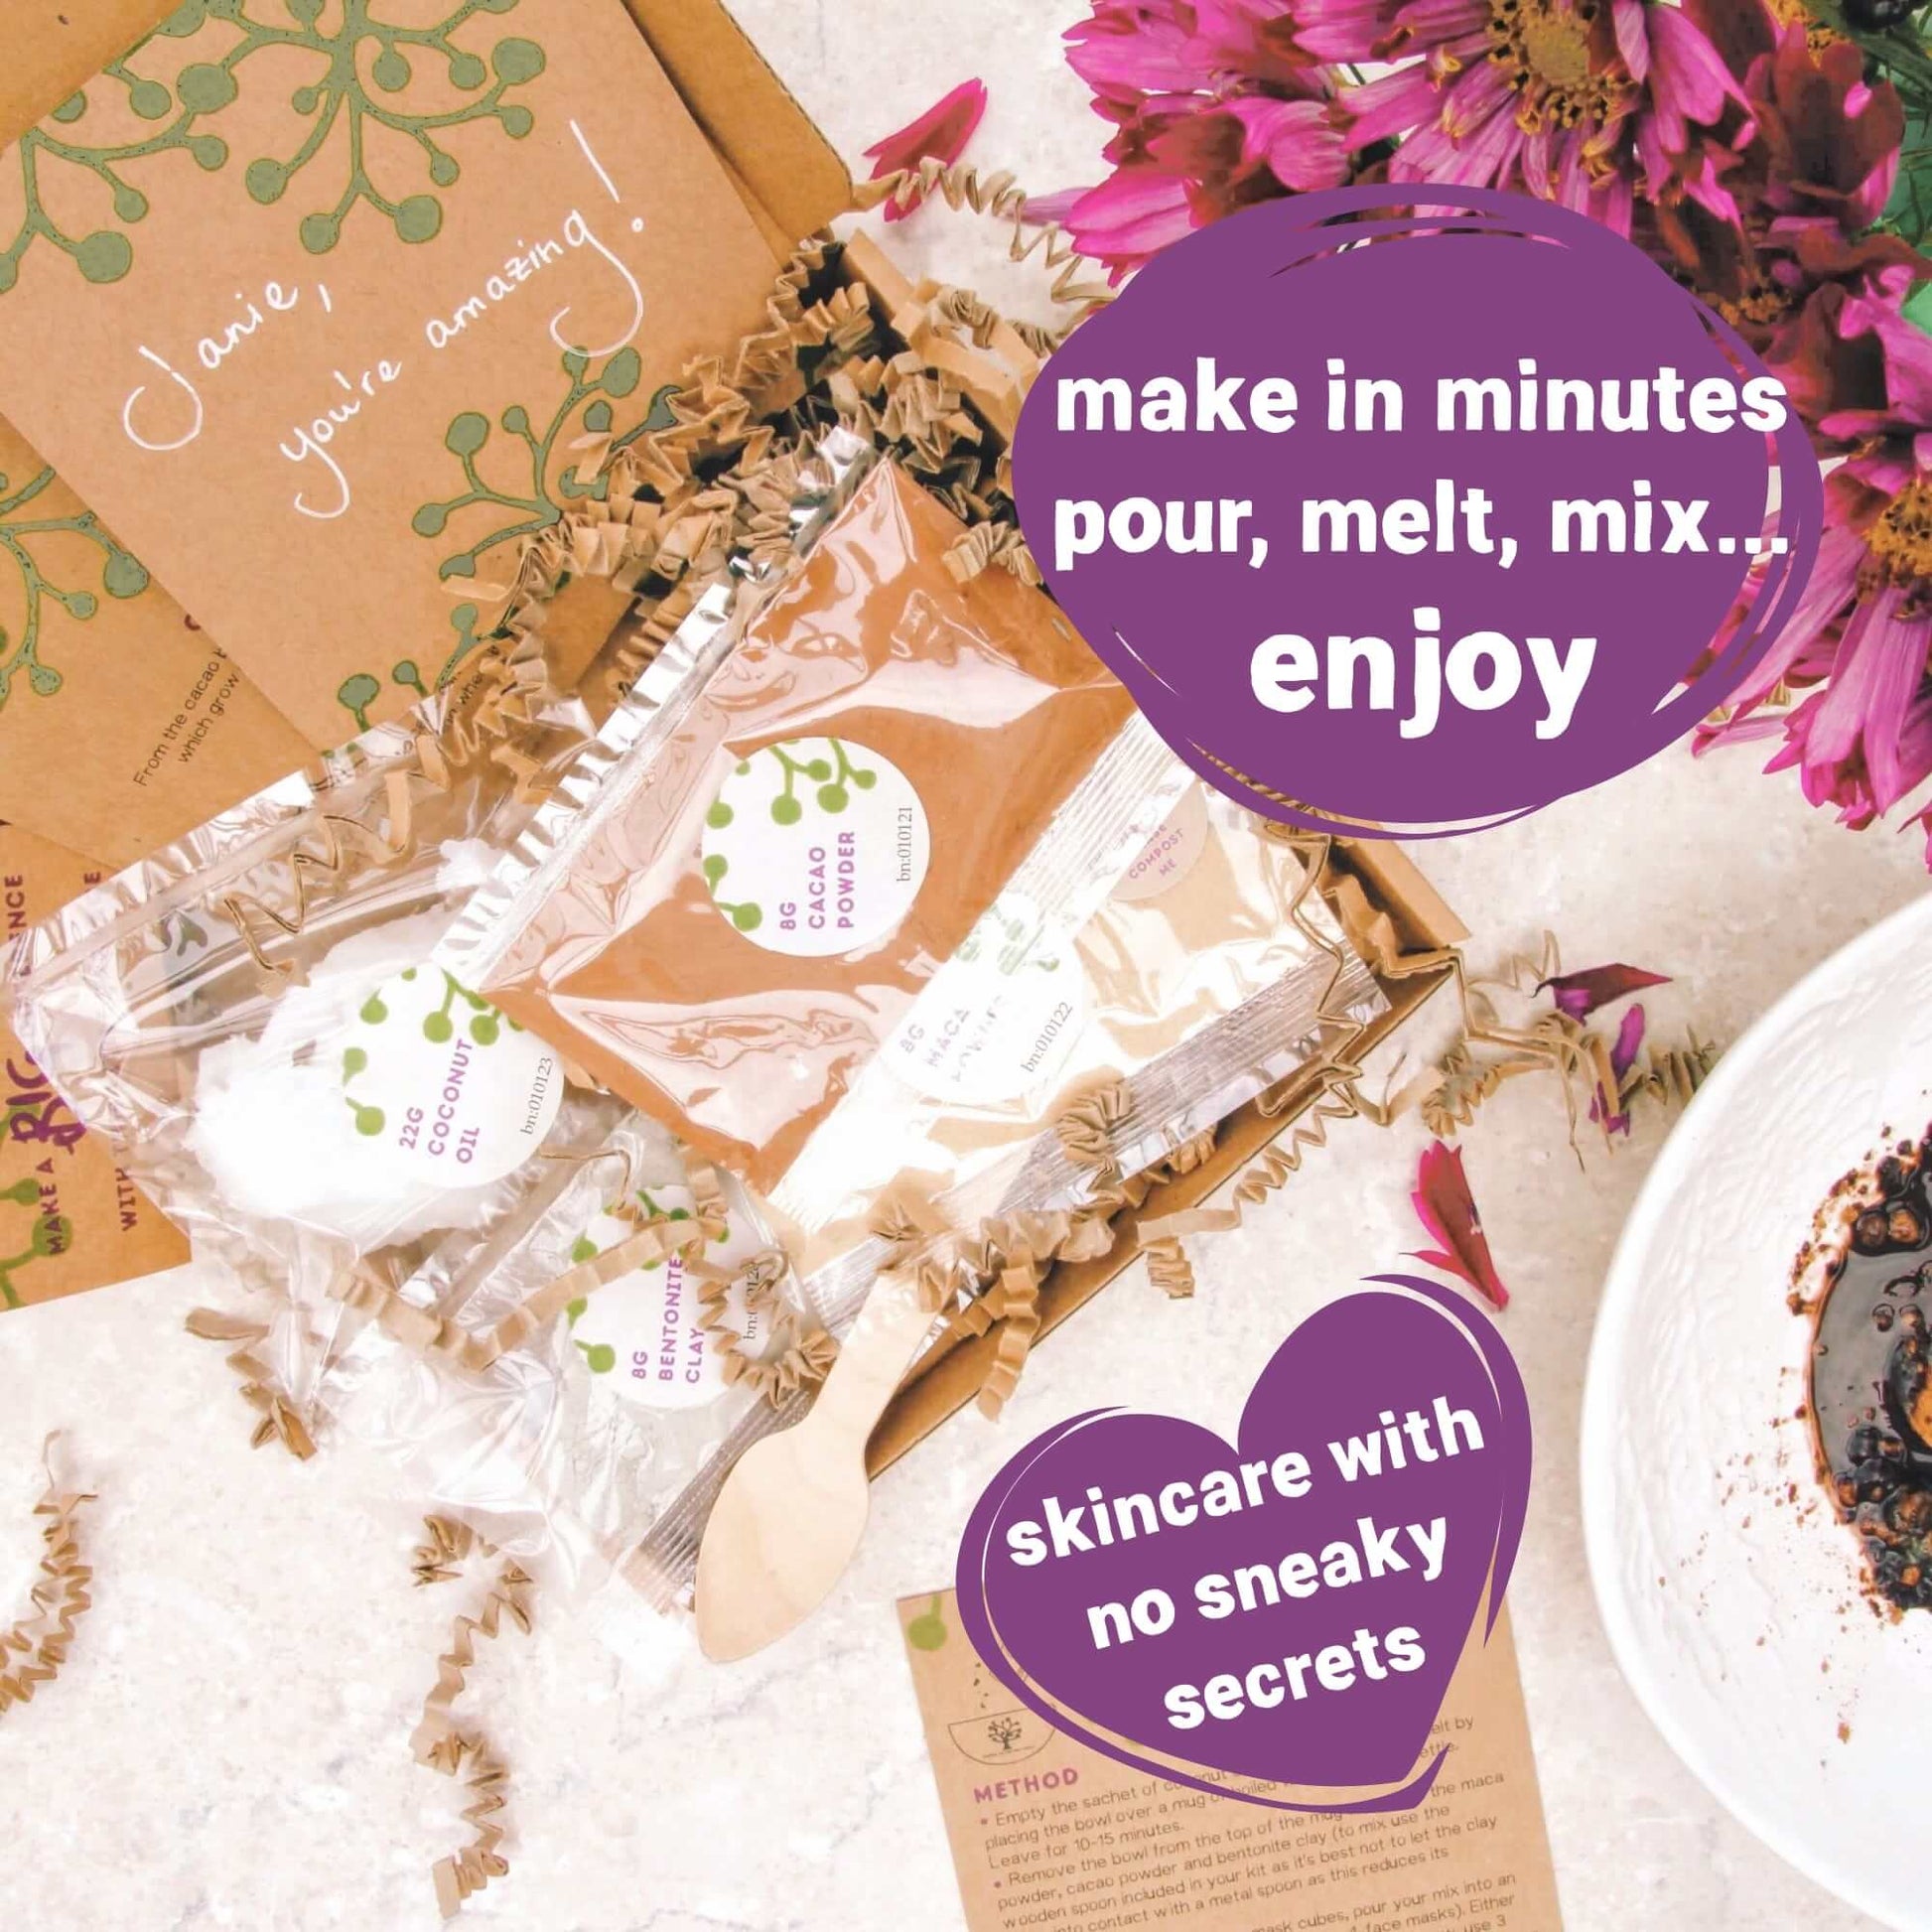 making eco-friendly skincare in minutes inside just for you gift box